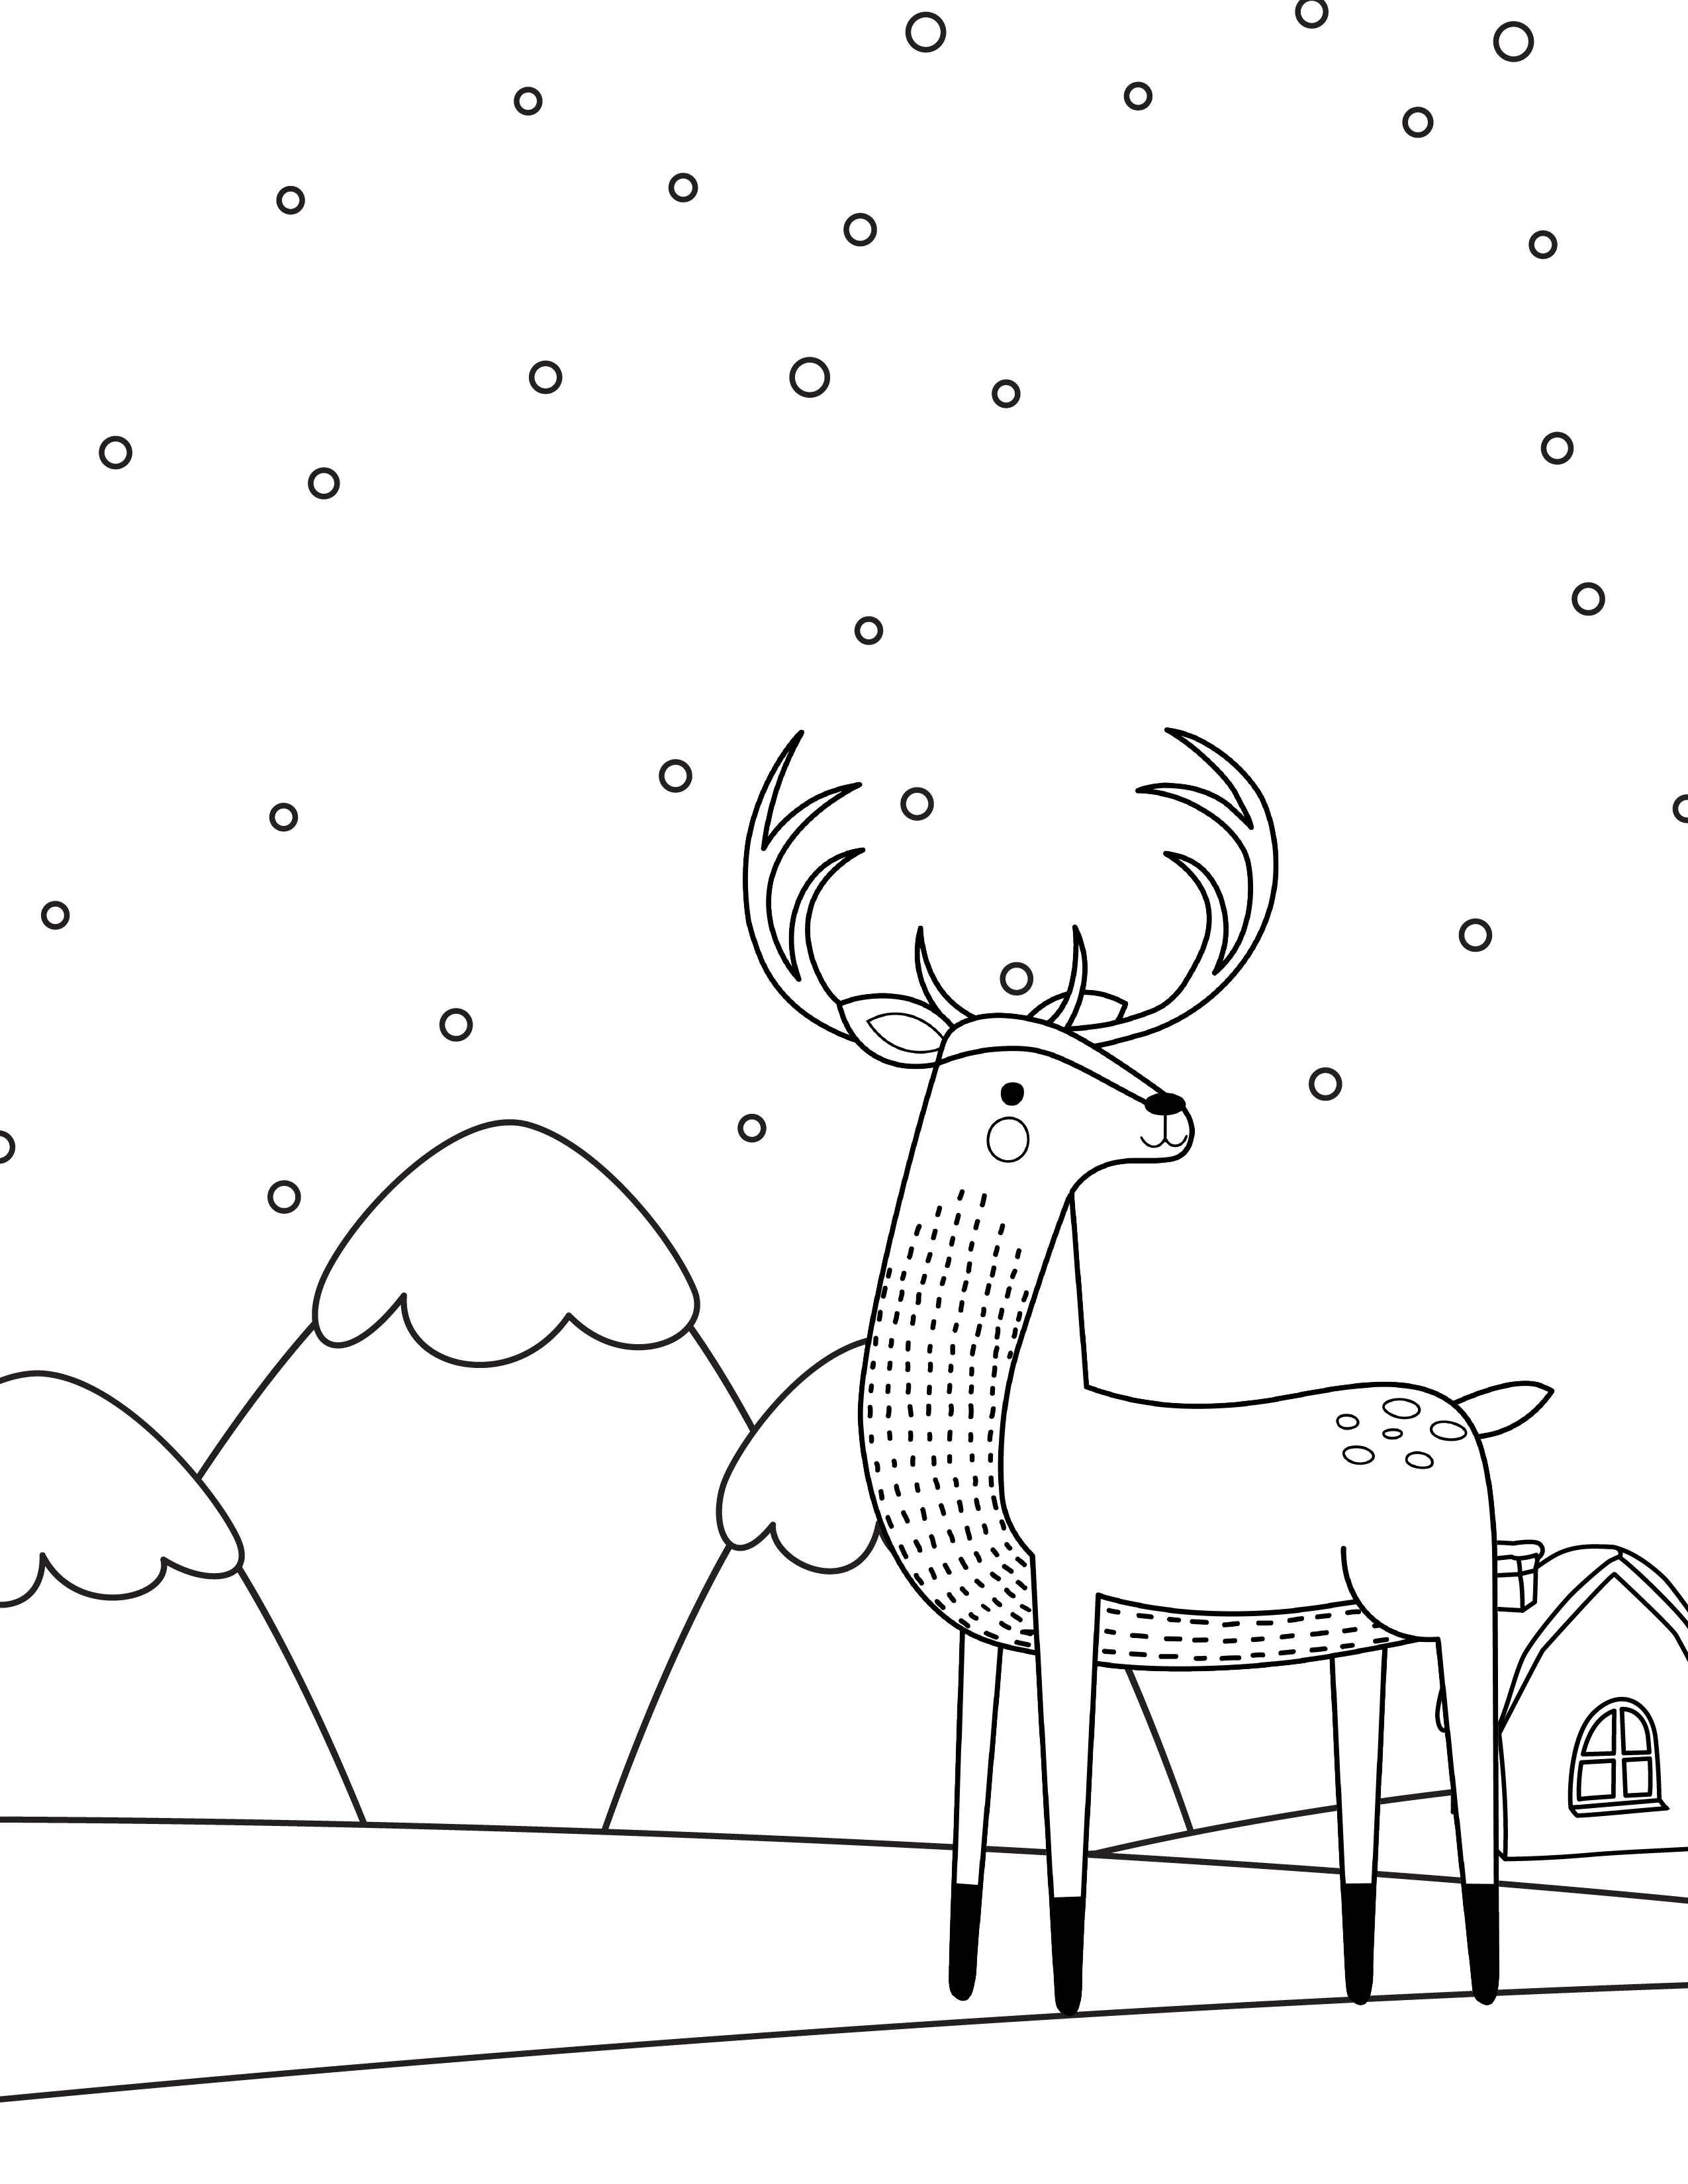 Artic Deer Coloring Pages for Kids Freebie Winter Christmas Moose Reindeer House on Hill Snowy Winter Mountains